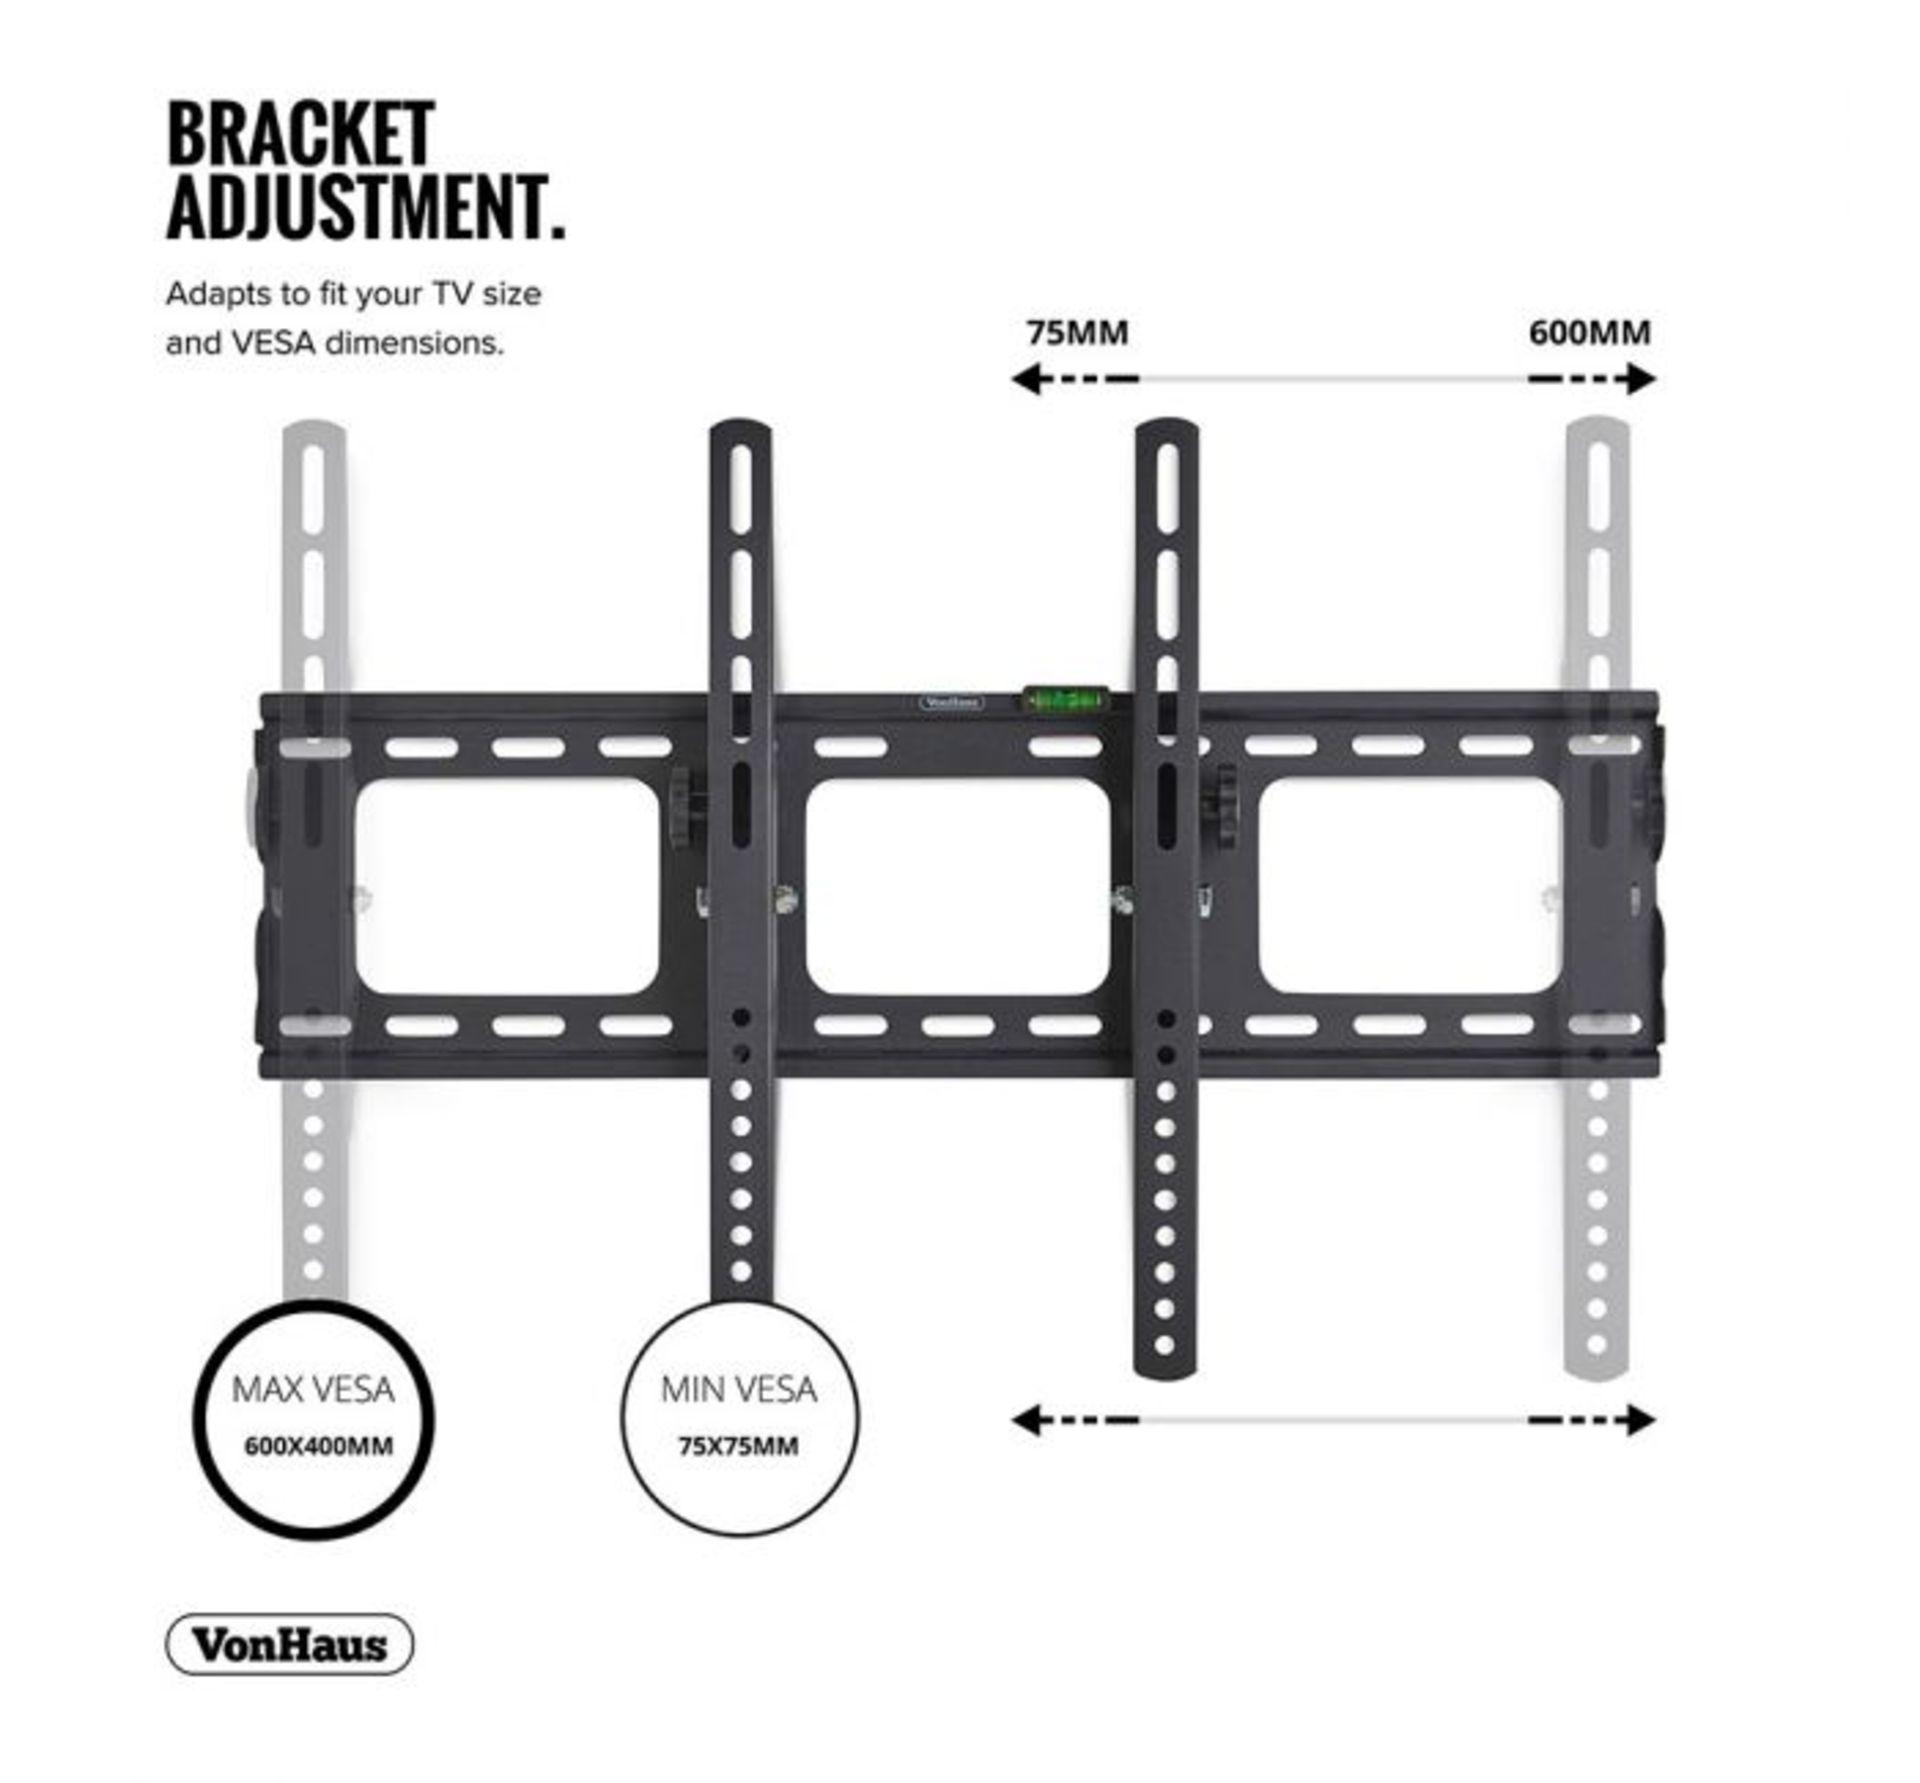 (AP223) 32-70 inch Tilt TV bracket Please confirm your TV’s VESA Mounting Dimensions and Scr...